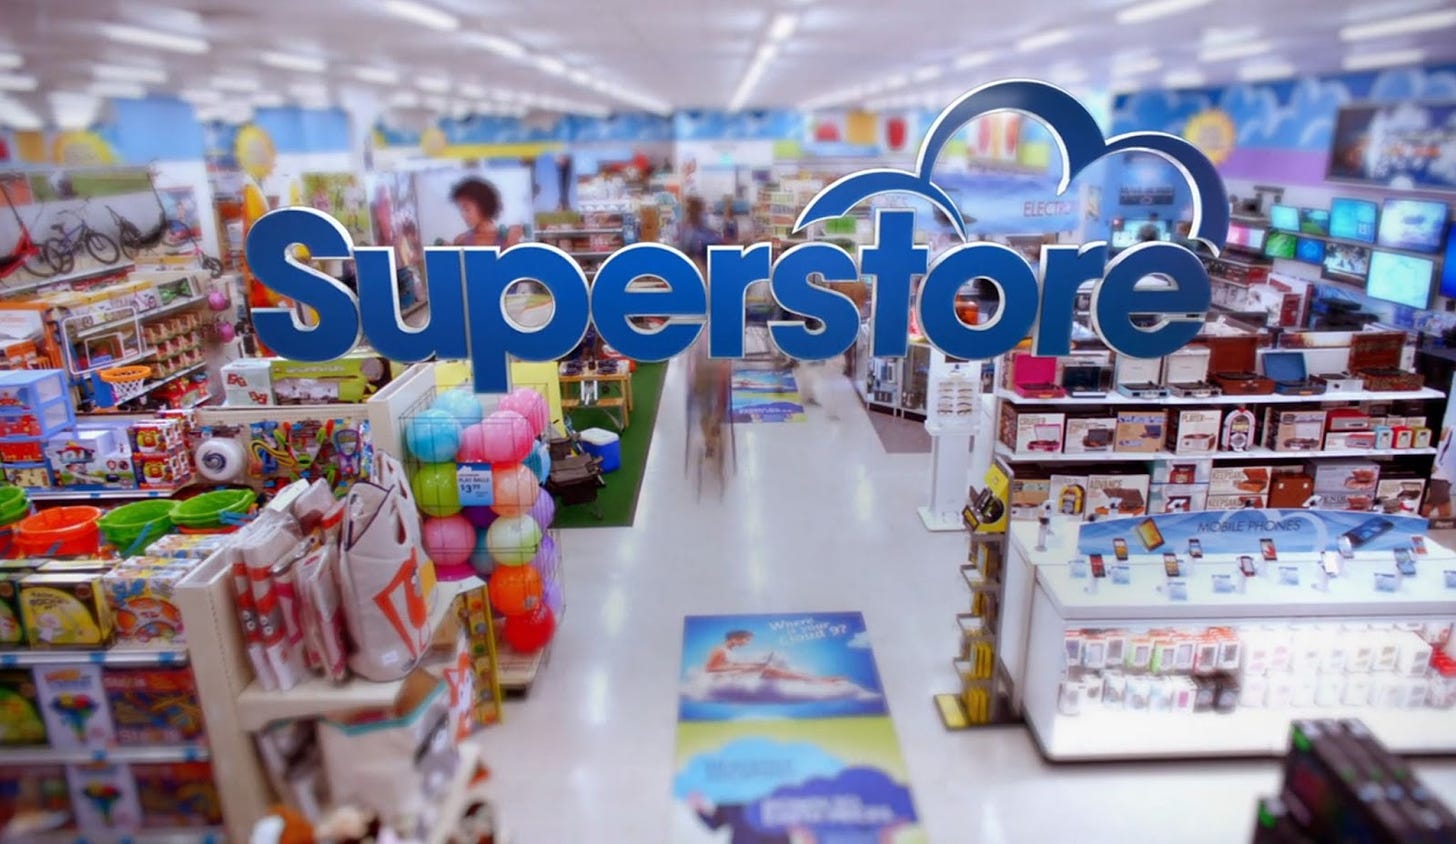 The SUPERSTORE title card